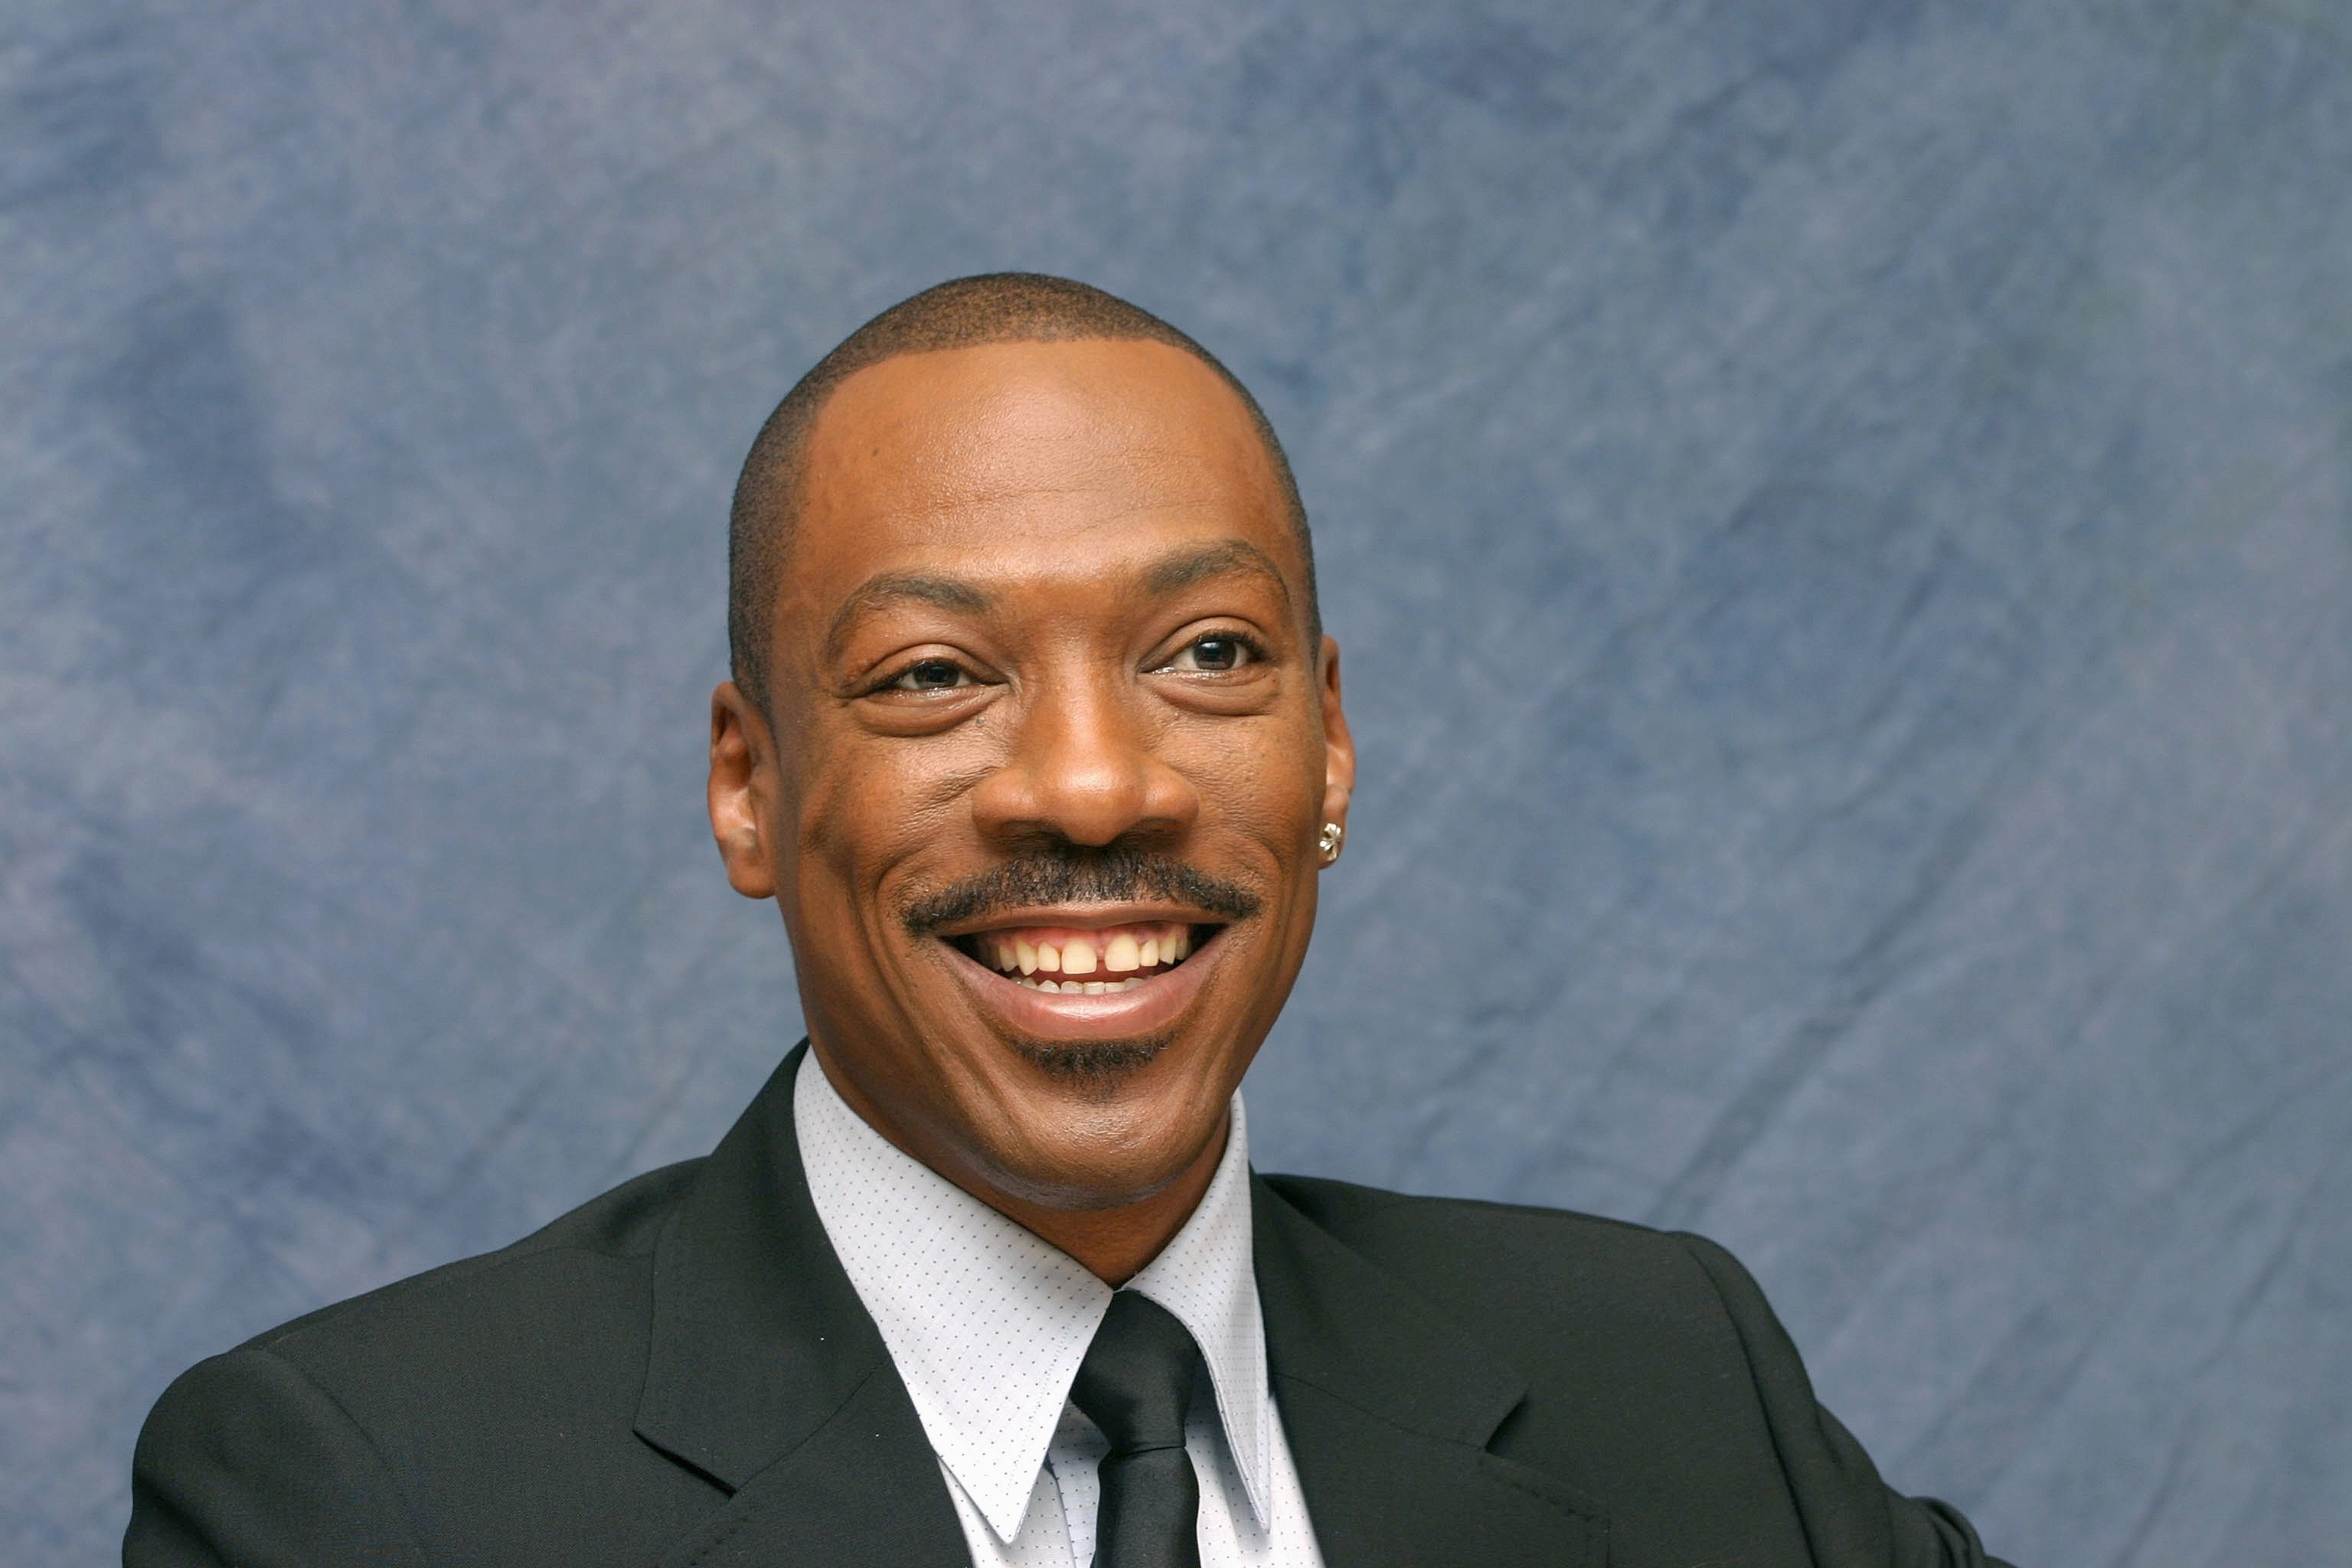 A portrait of Eddie Murphy from 2006. | Photo: Getty Images